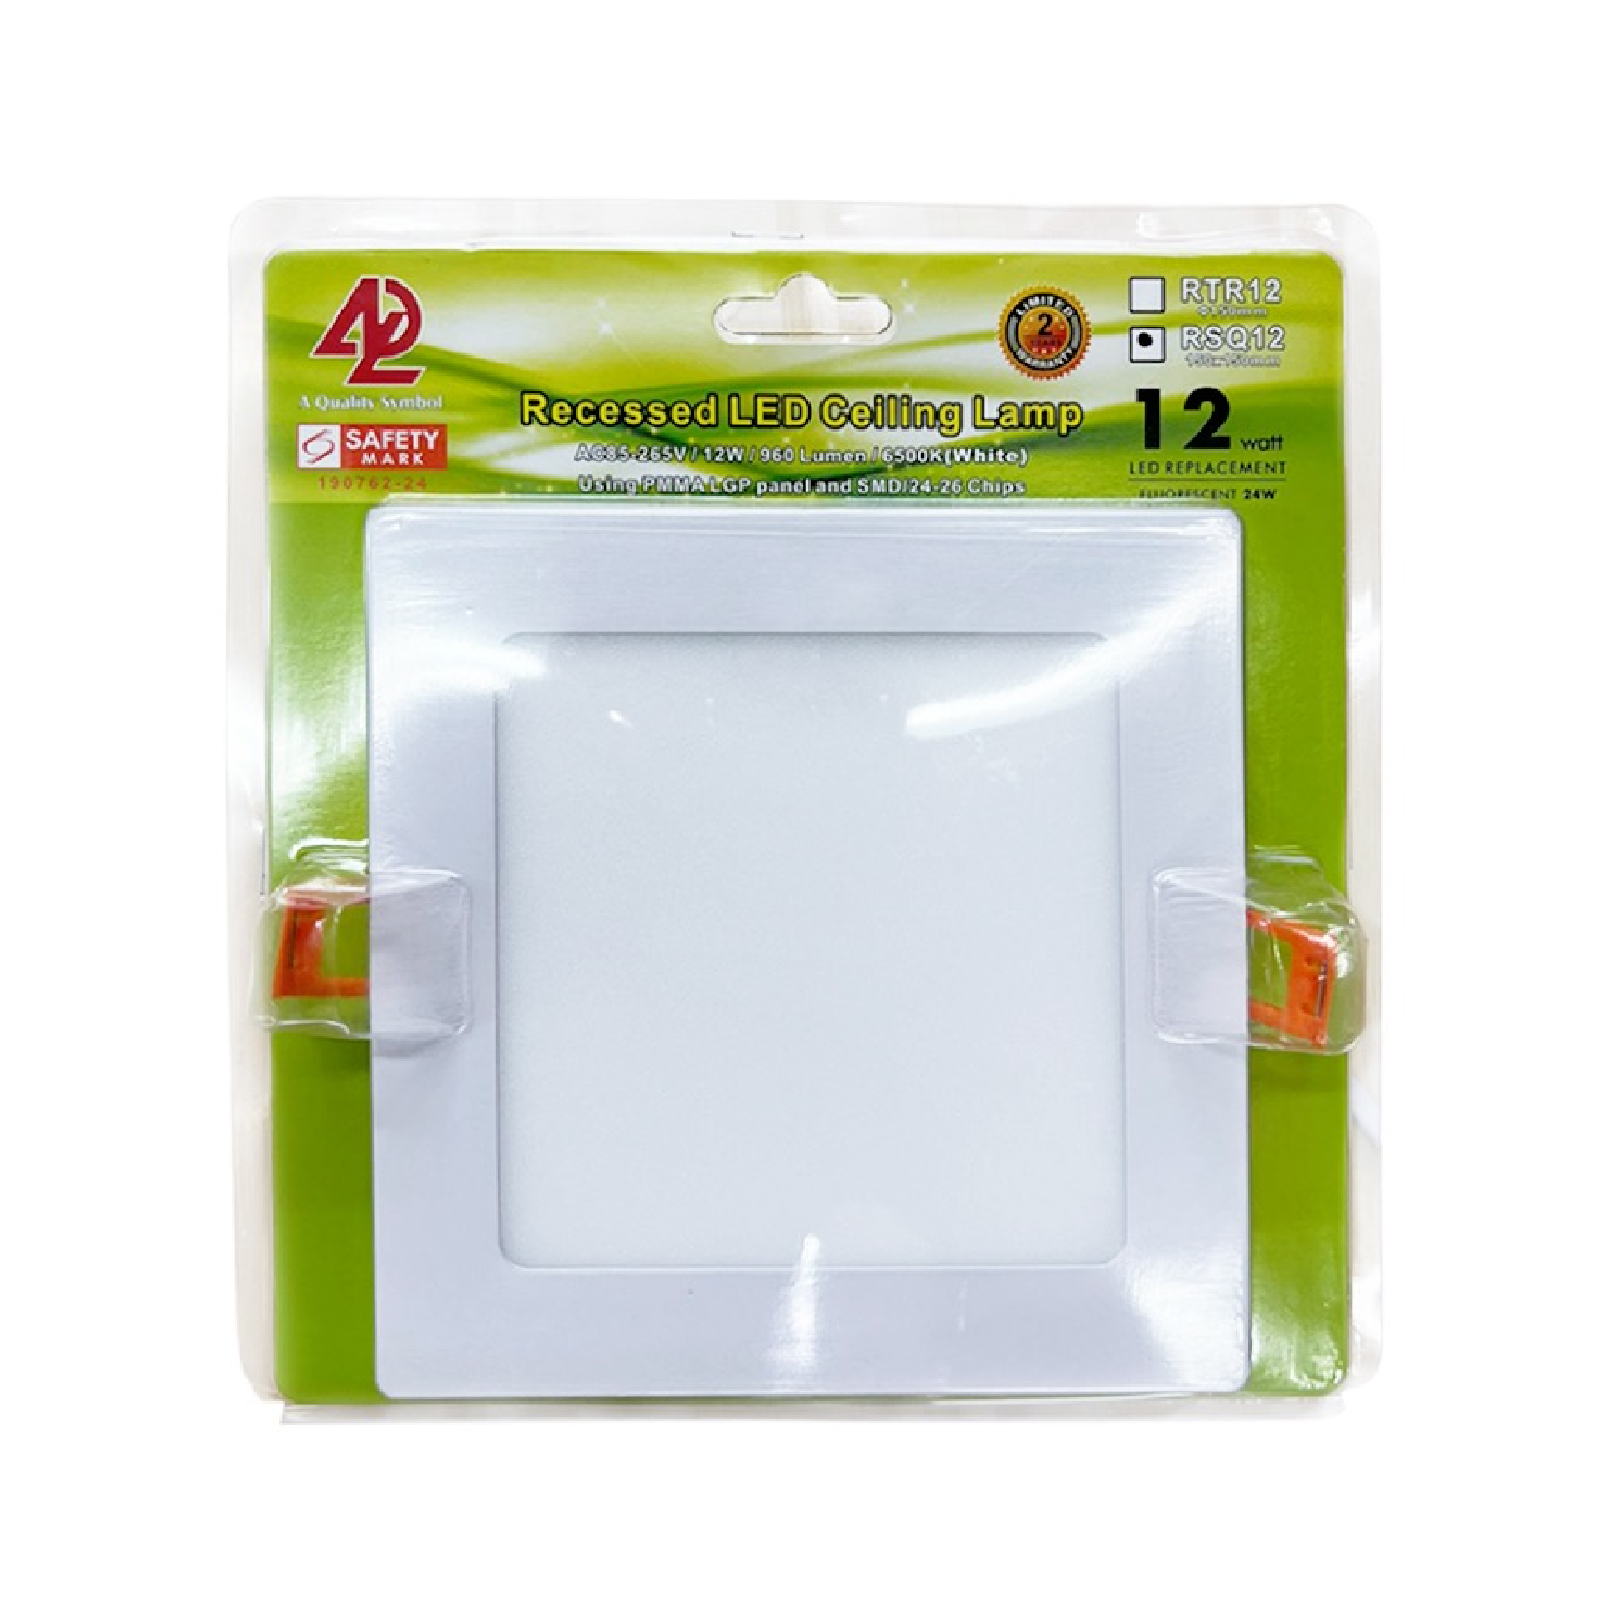 ADL RSQ12, 12W Square Recessed LED Ceiling Lamp